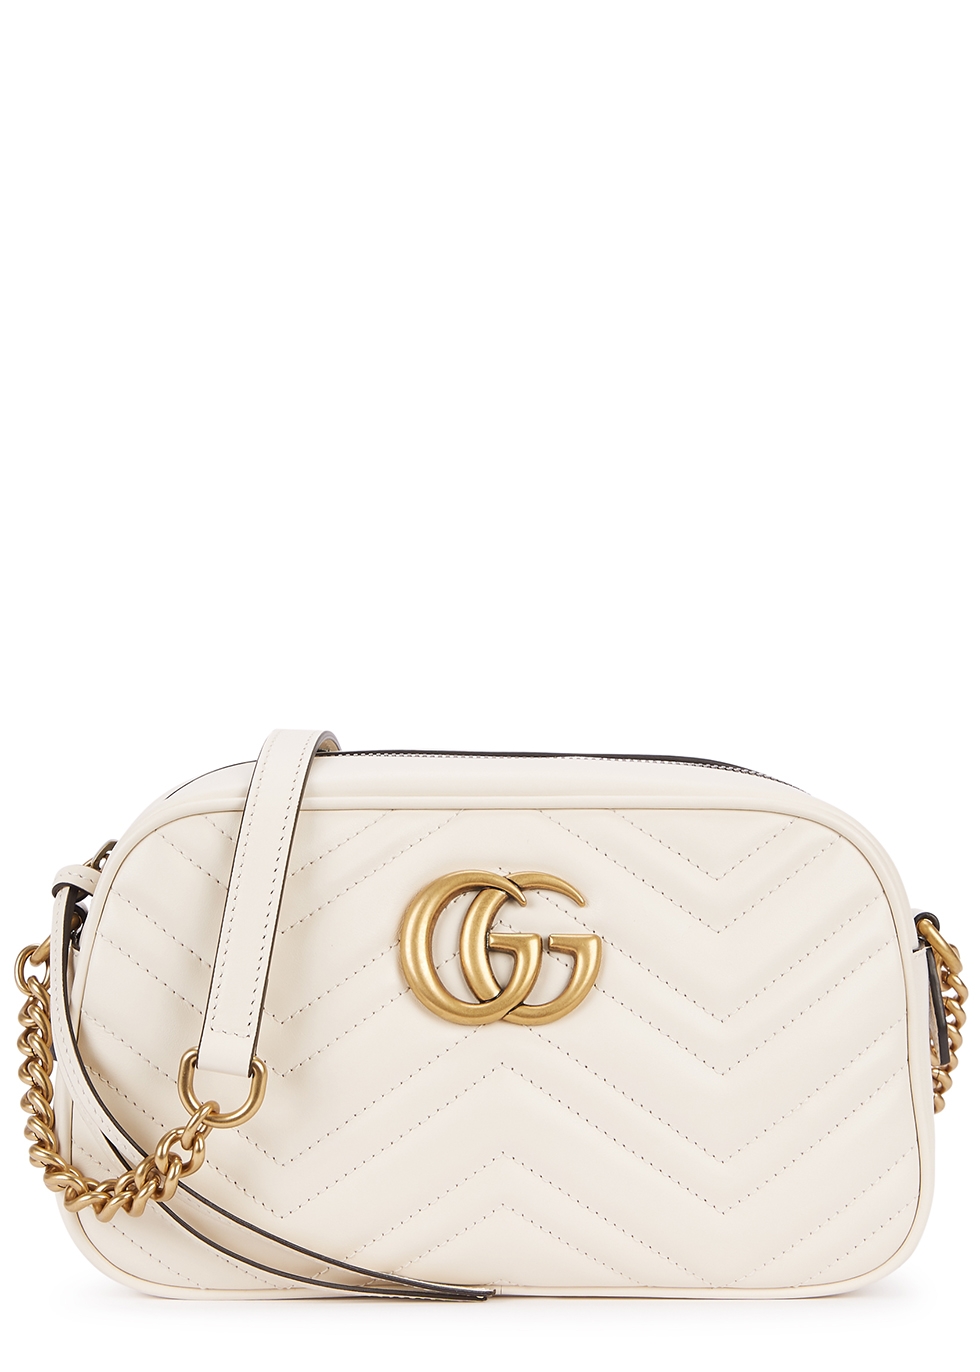 Gucci GG Marmont small ivory leather 